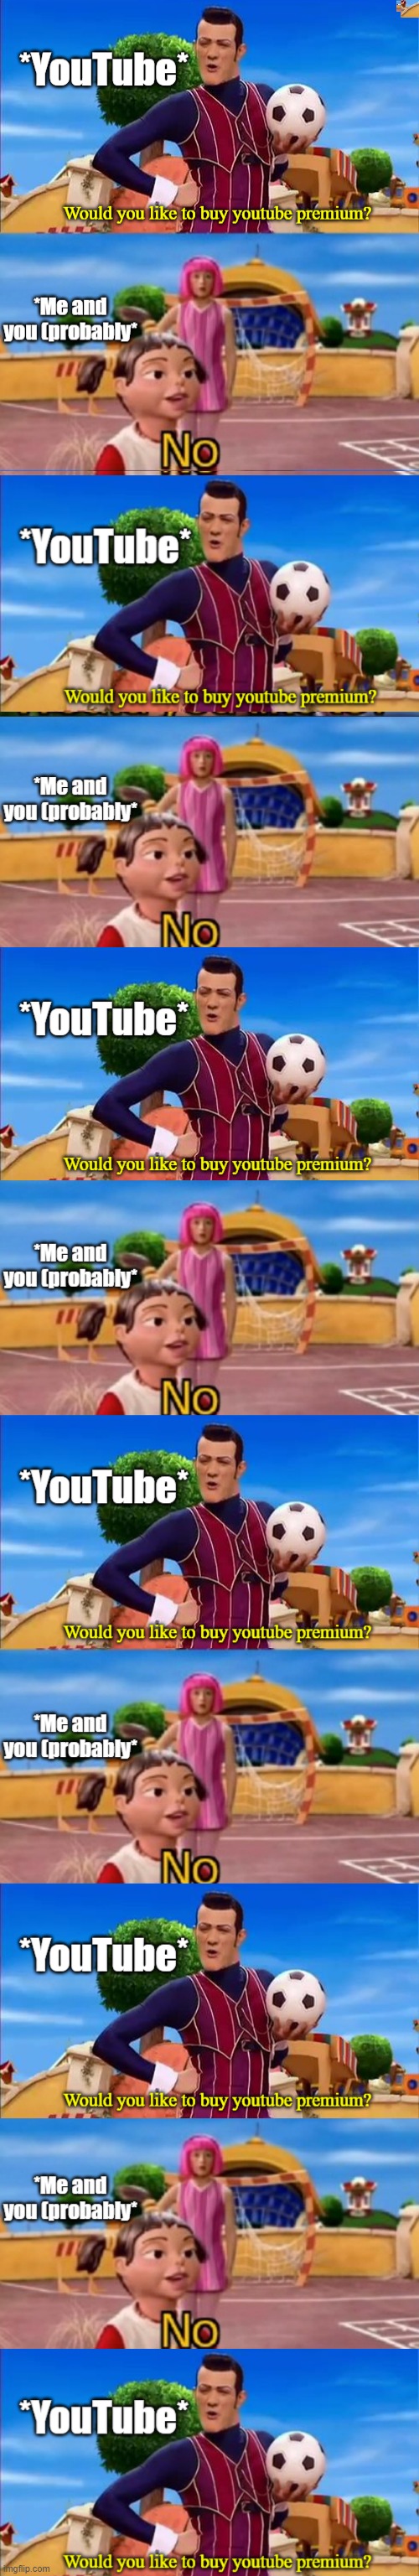 Would you like to Buy YouTube Premium?, like seriously, no. | image tagged in would you like to,youtube,meme | made w/ Imgflip meme maker